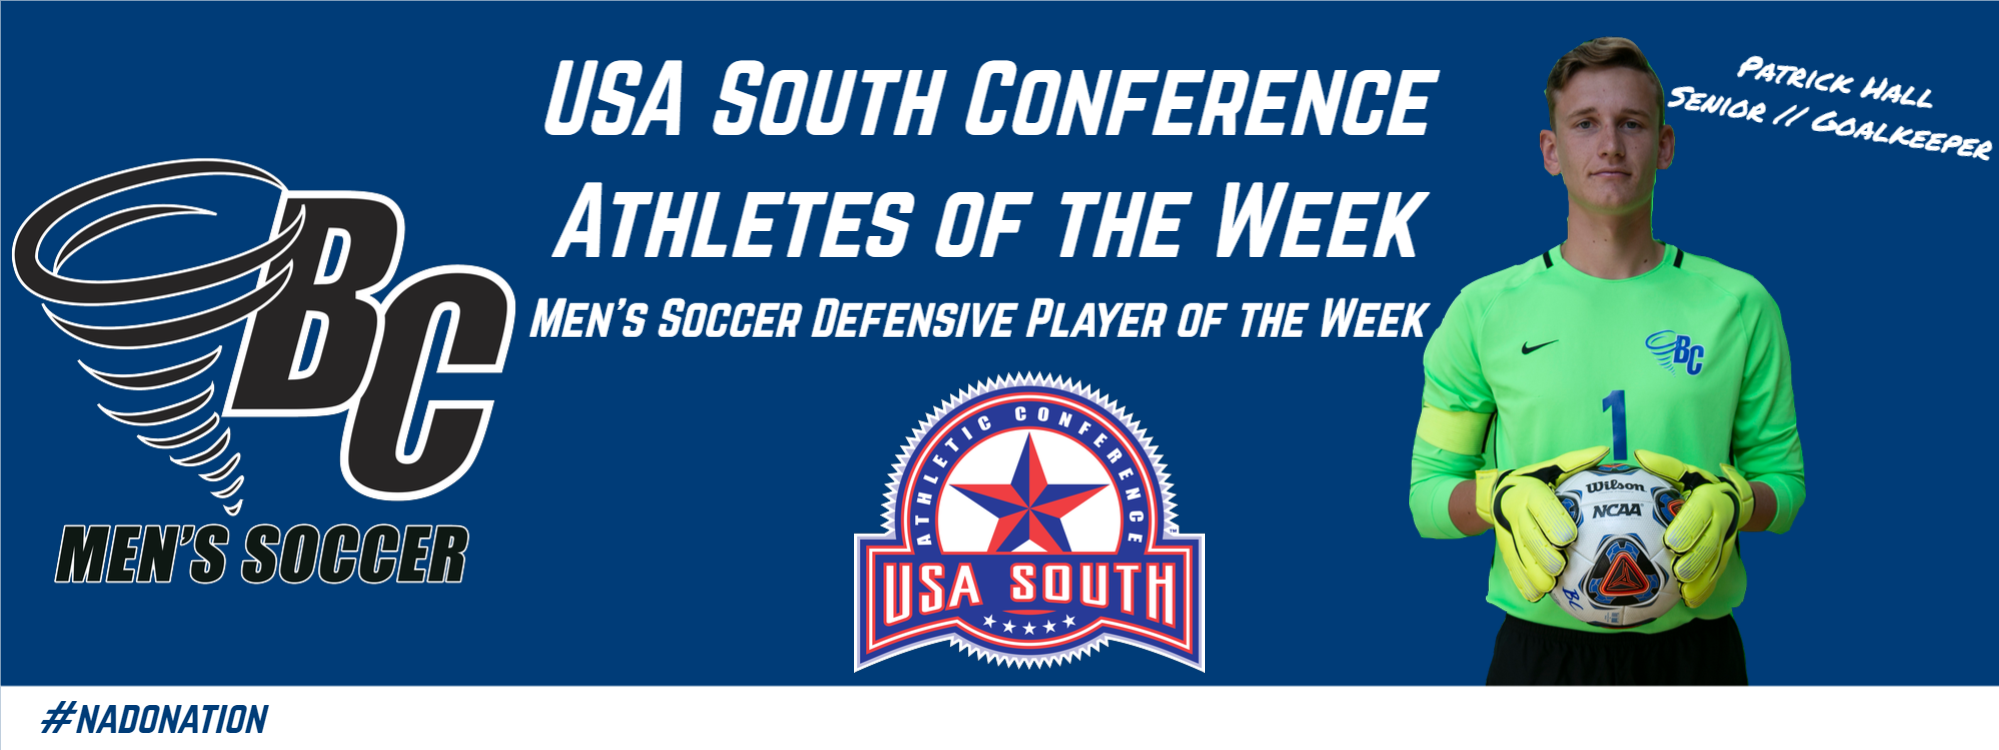 Patrick Hall Tabbed USA South Men’s Soccer Defensive Player of the Week